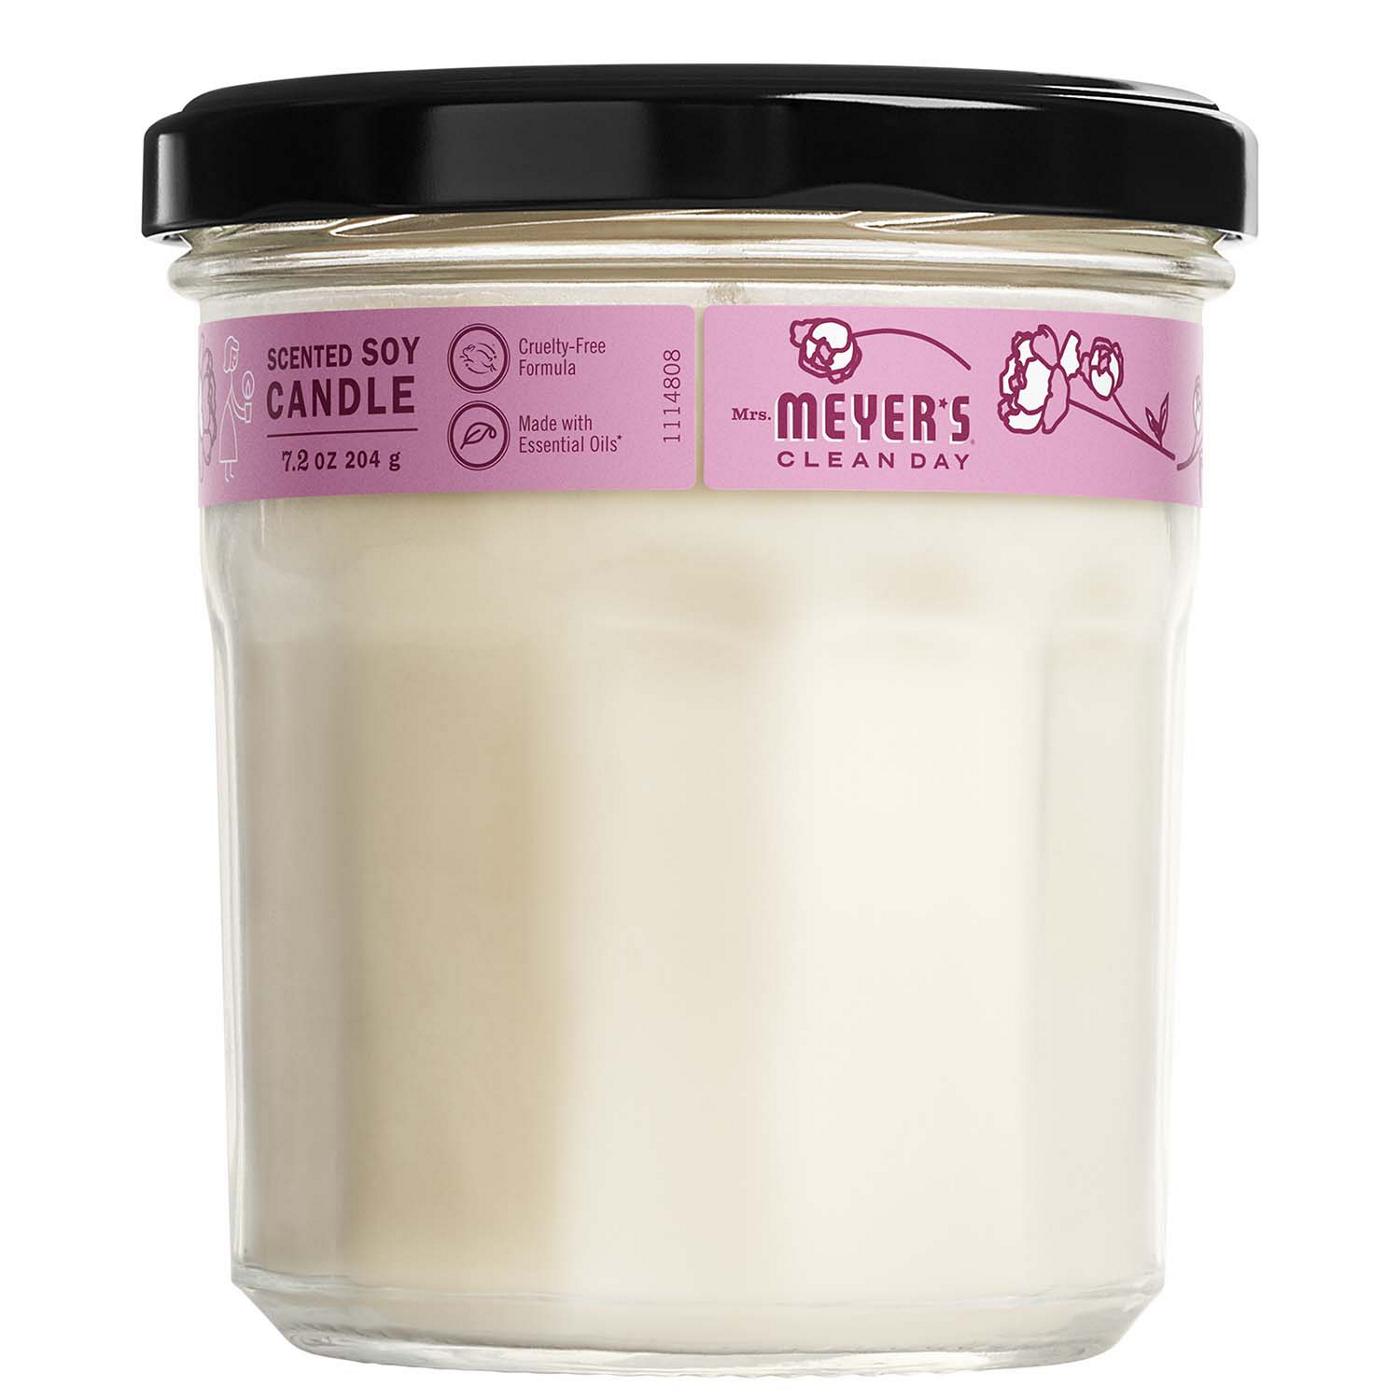 Mrs. Meyer's Clean Day Peony Soy Candle; image 4 of 6